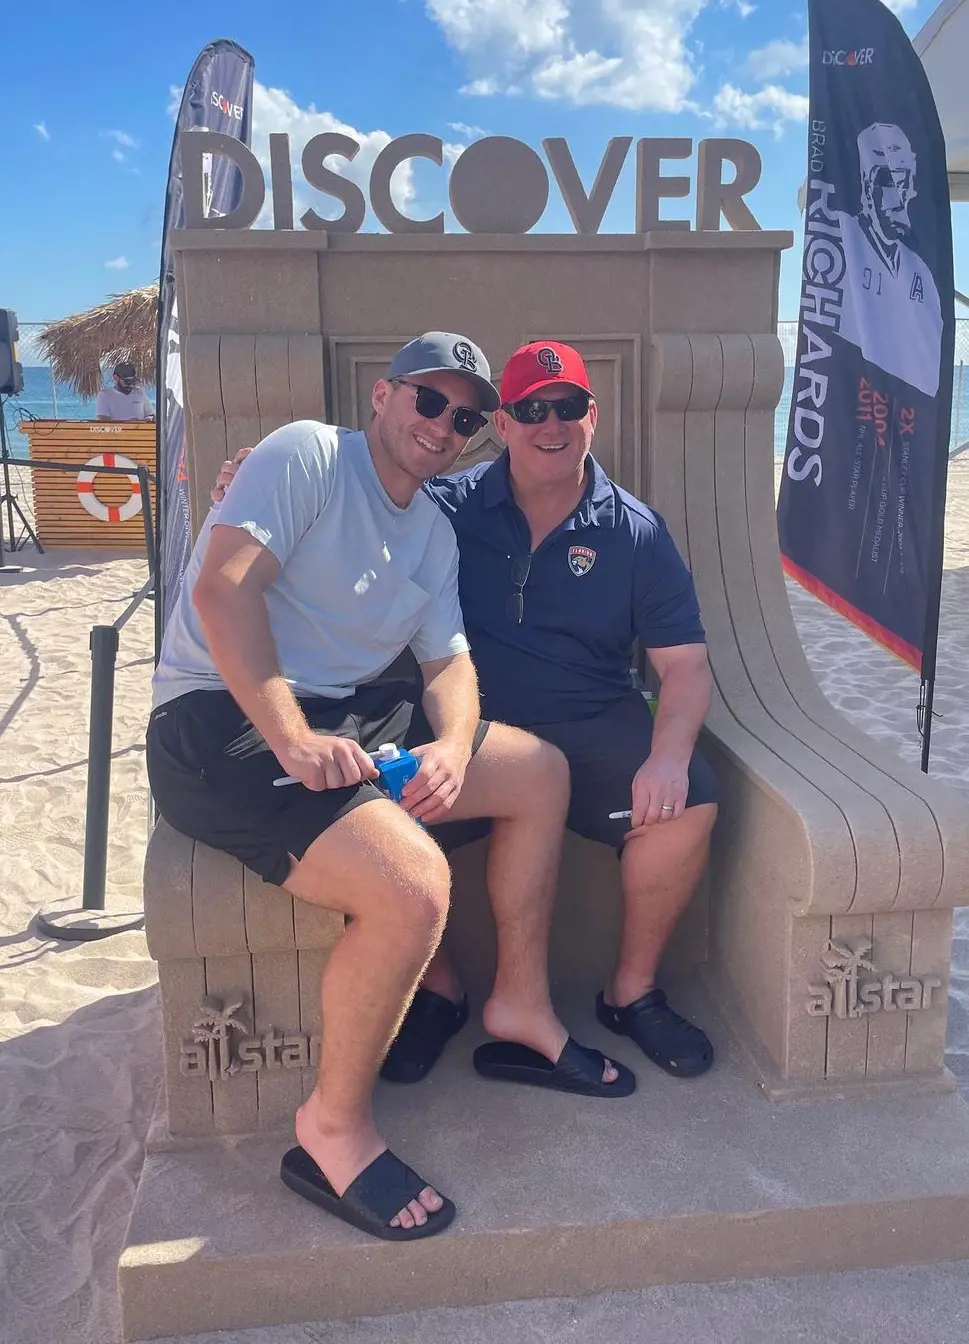 The father-son duo enjoying the Discovery's Beach Fest Activation on February 4. 